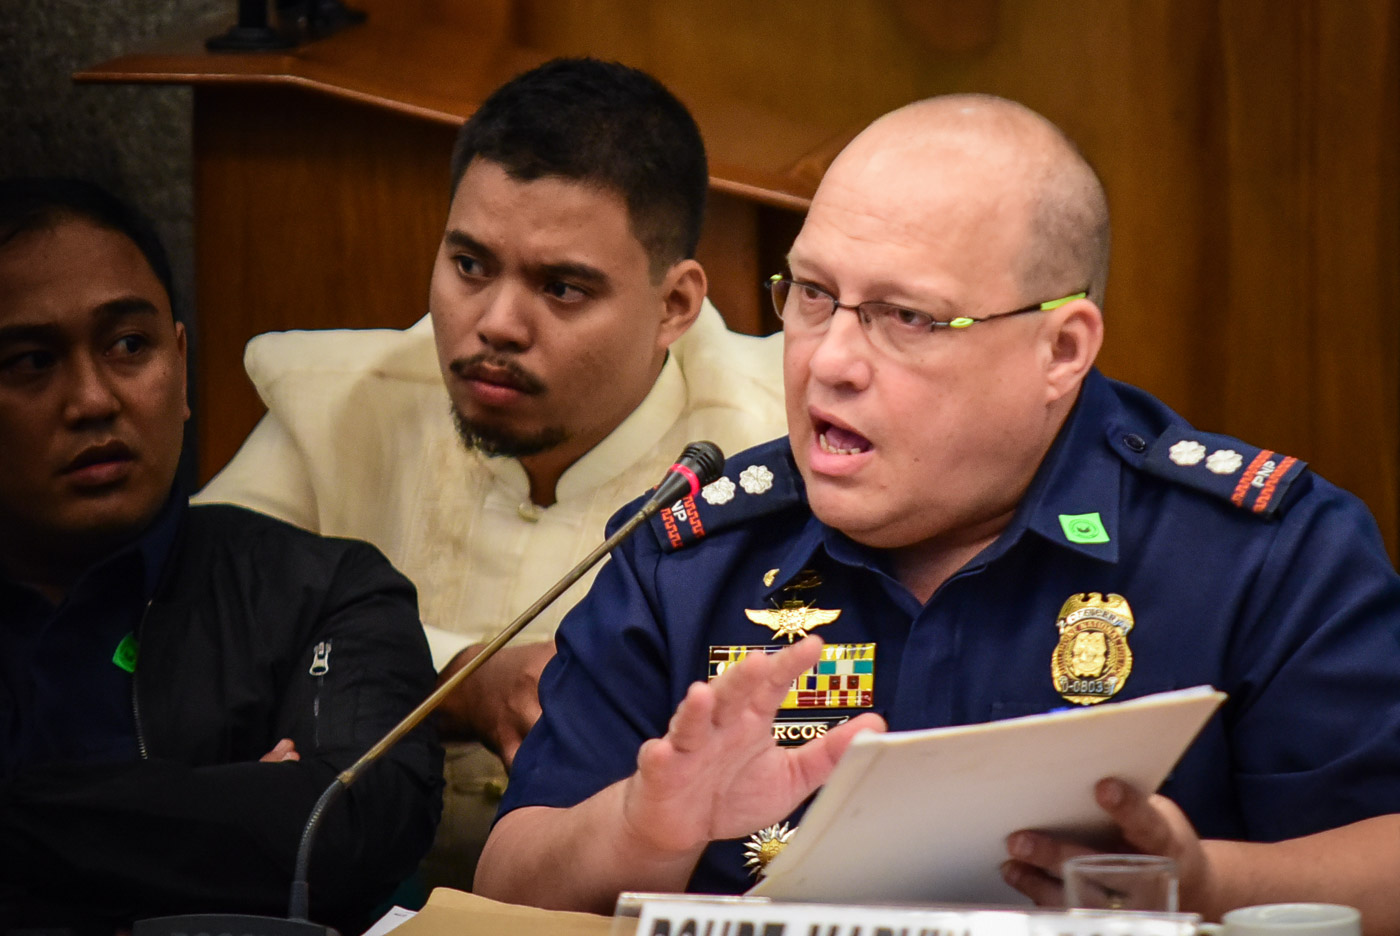 UP FOR PROMOTION? As the new CIDG chief of Soccsksargen, Marvin Marcos may be promoted after his return. File photo by LeAnne Jazul/Rappler 